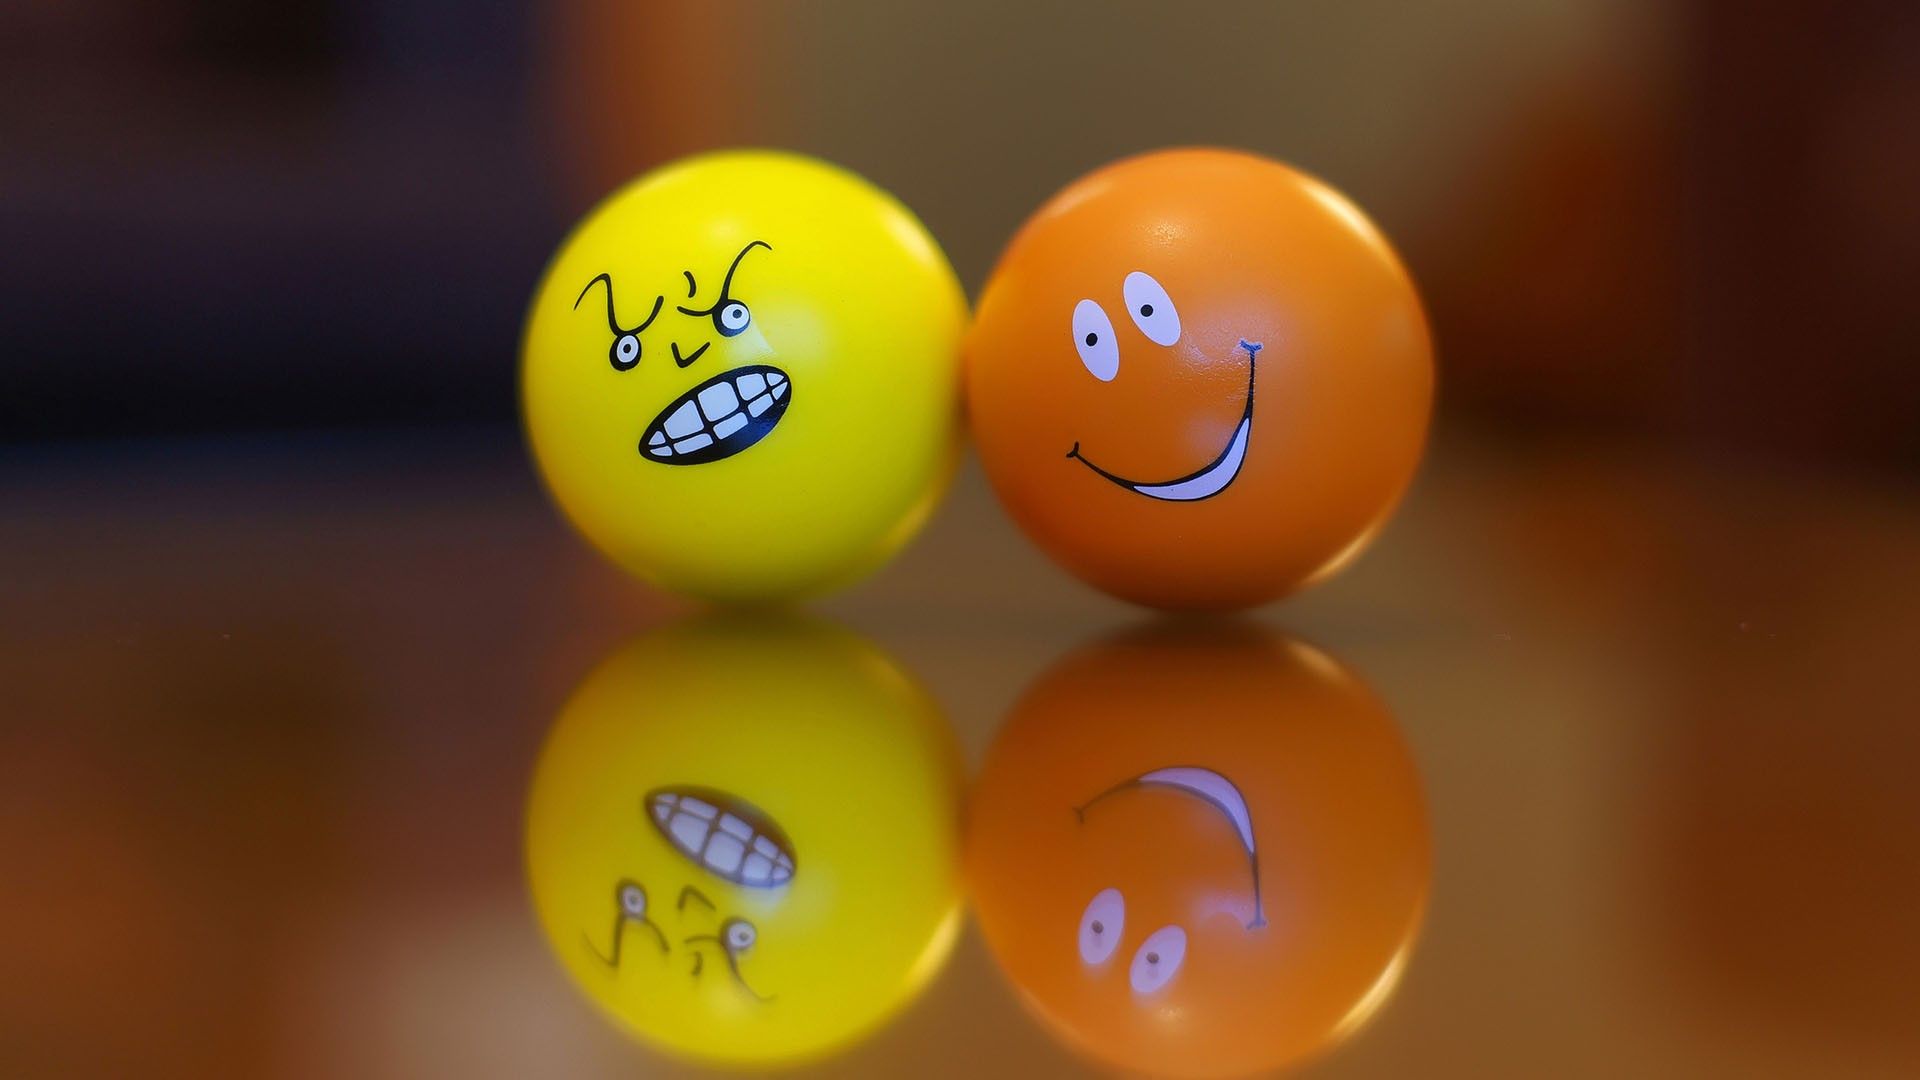 Ball Smile Background Images HD Pictures and Wallpaper For Free Download   Pngtree